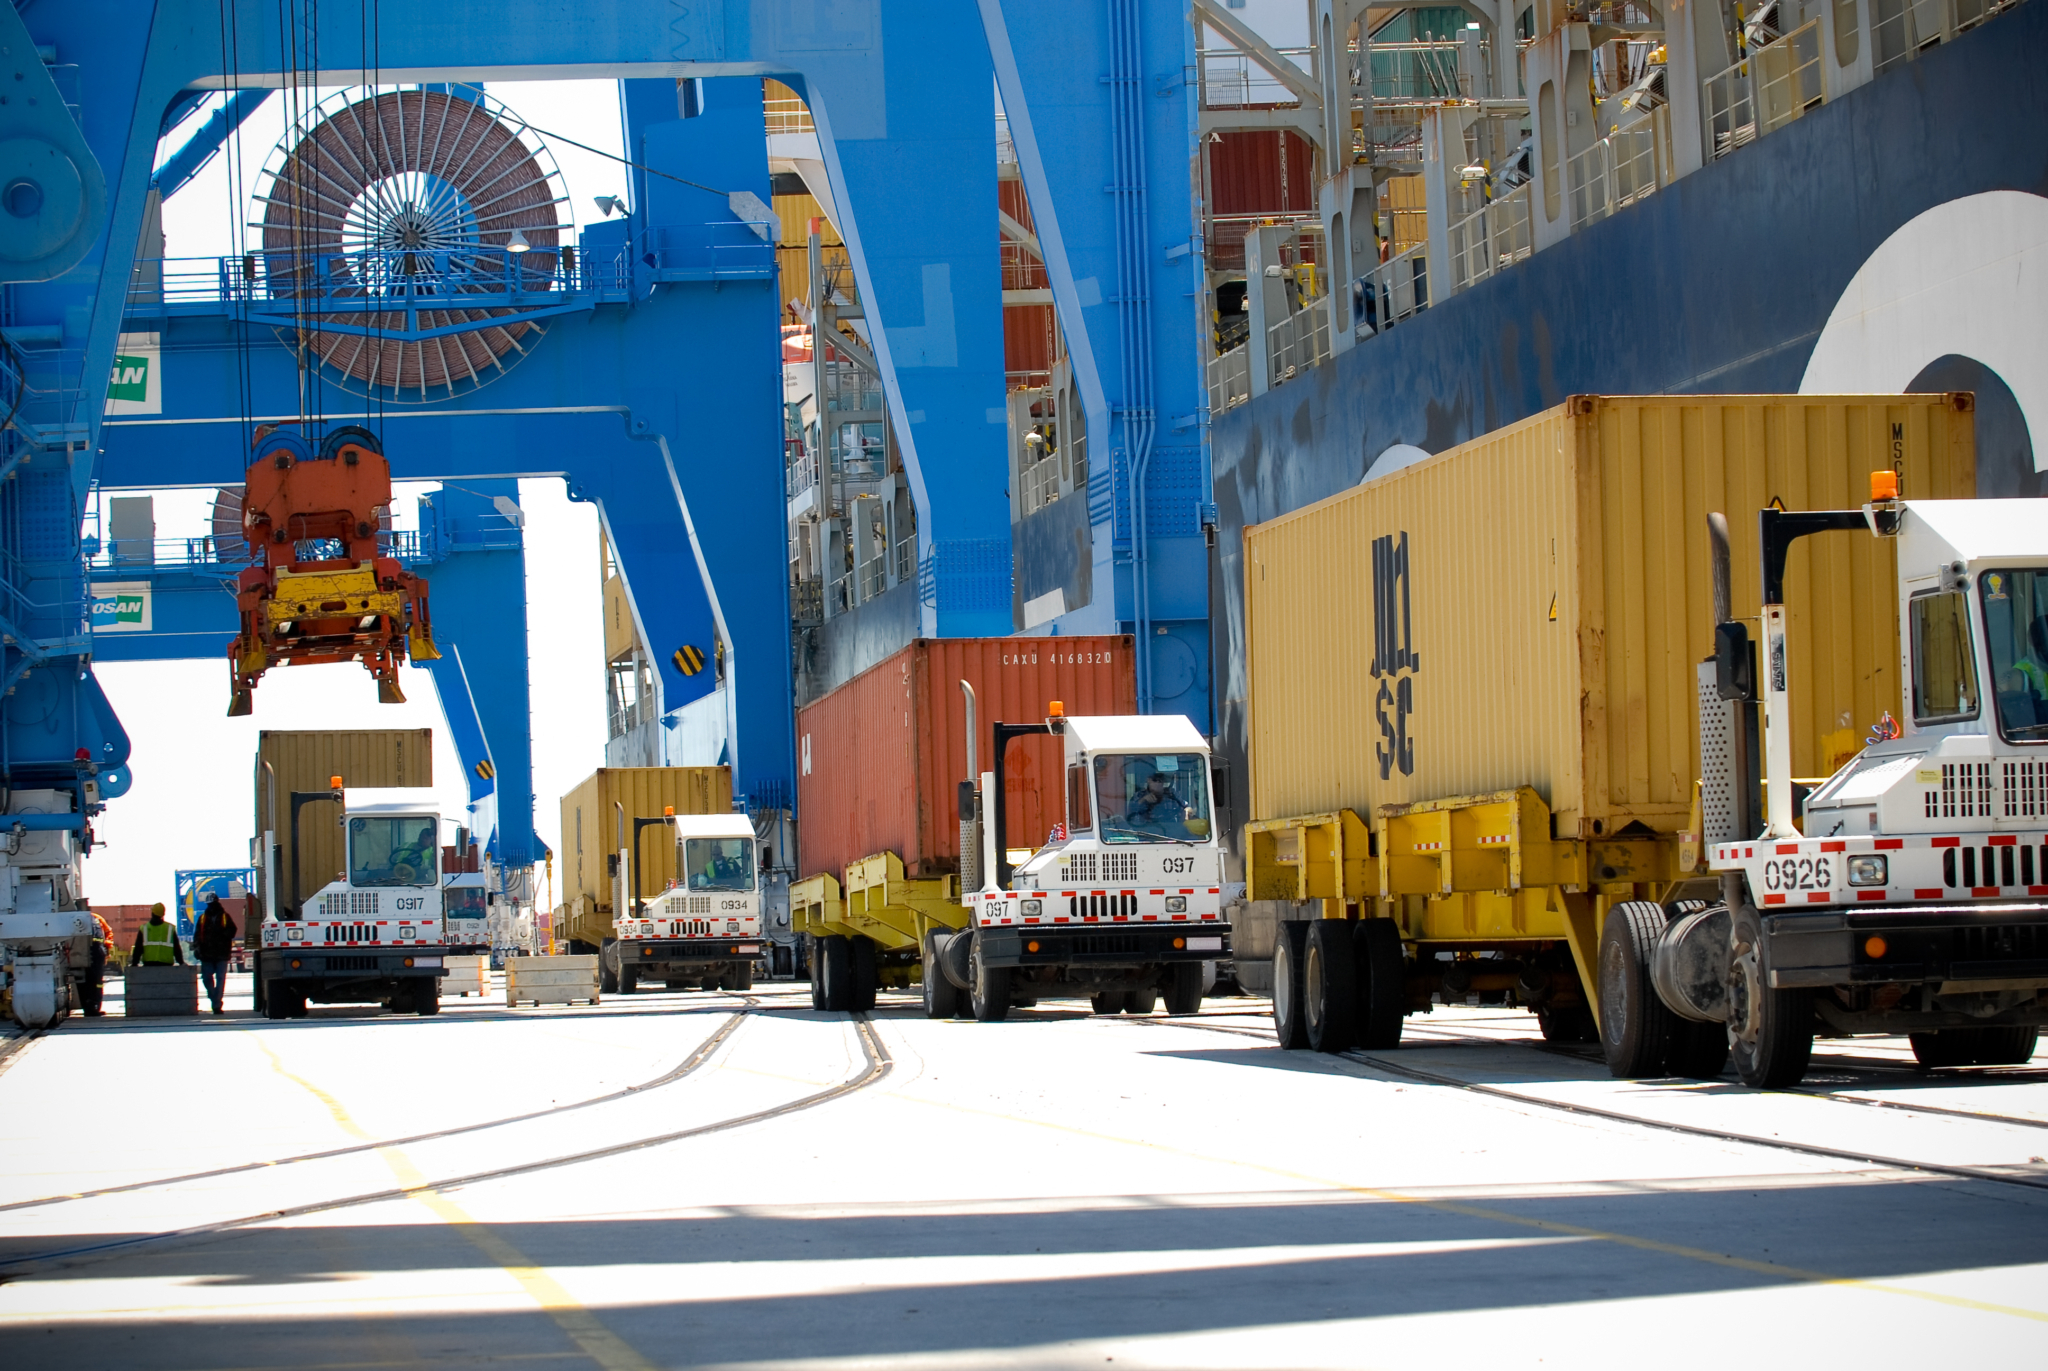 Gantry Cranes Loading Containers Onto Drayage Trucks